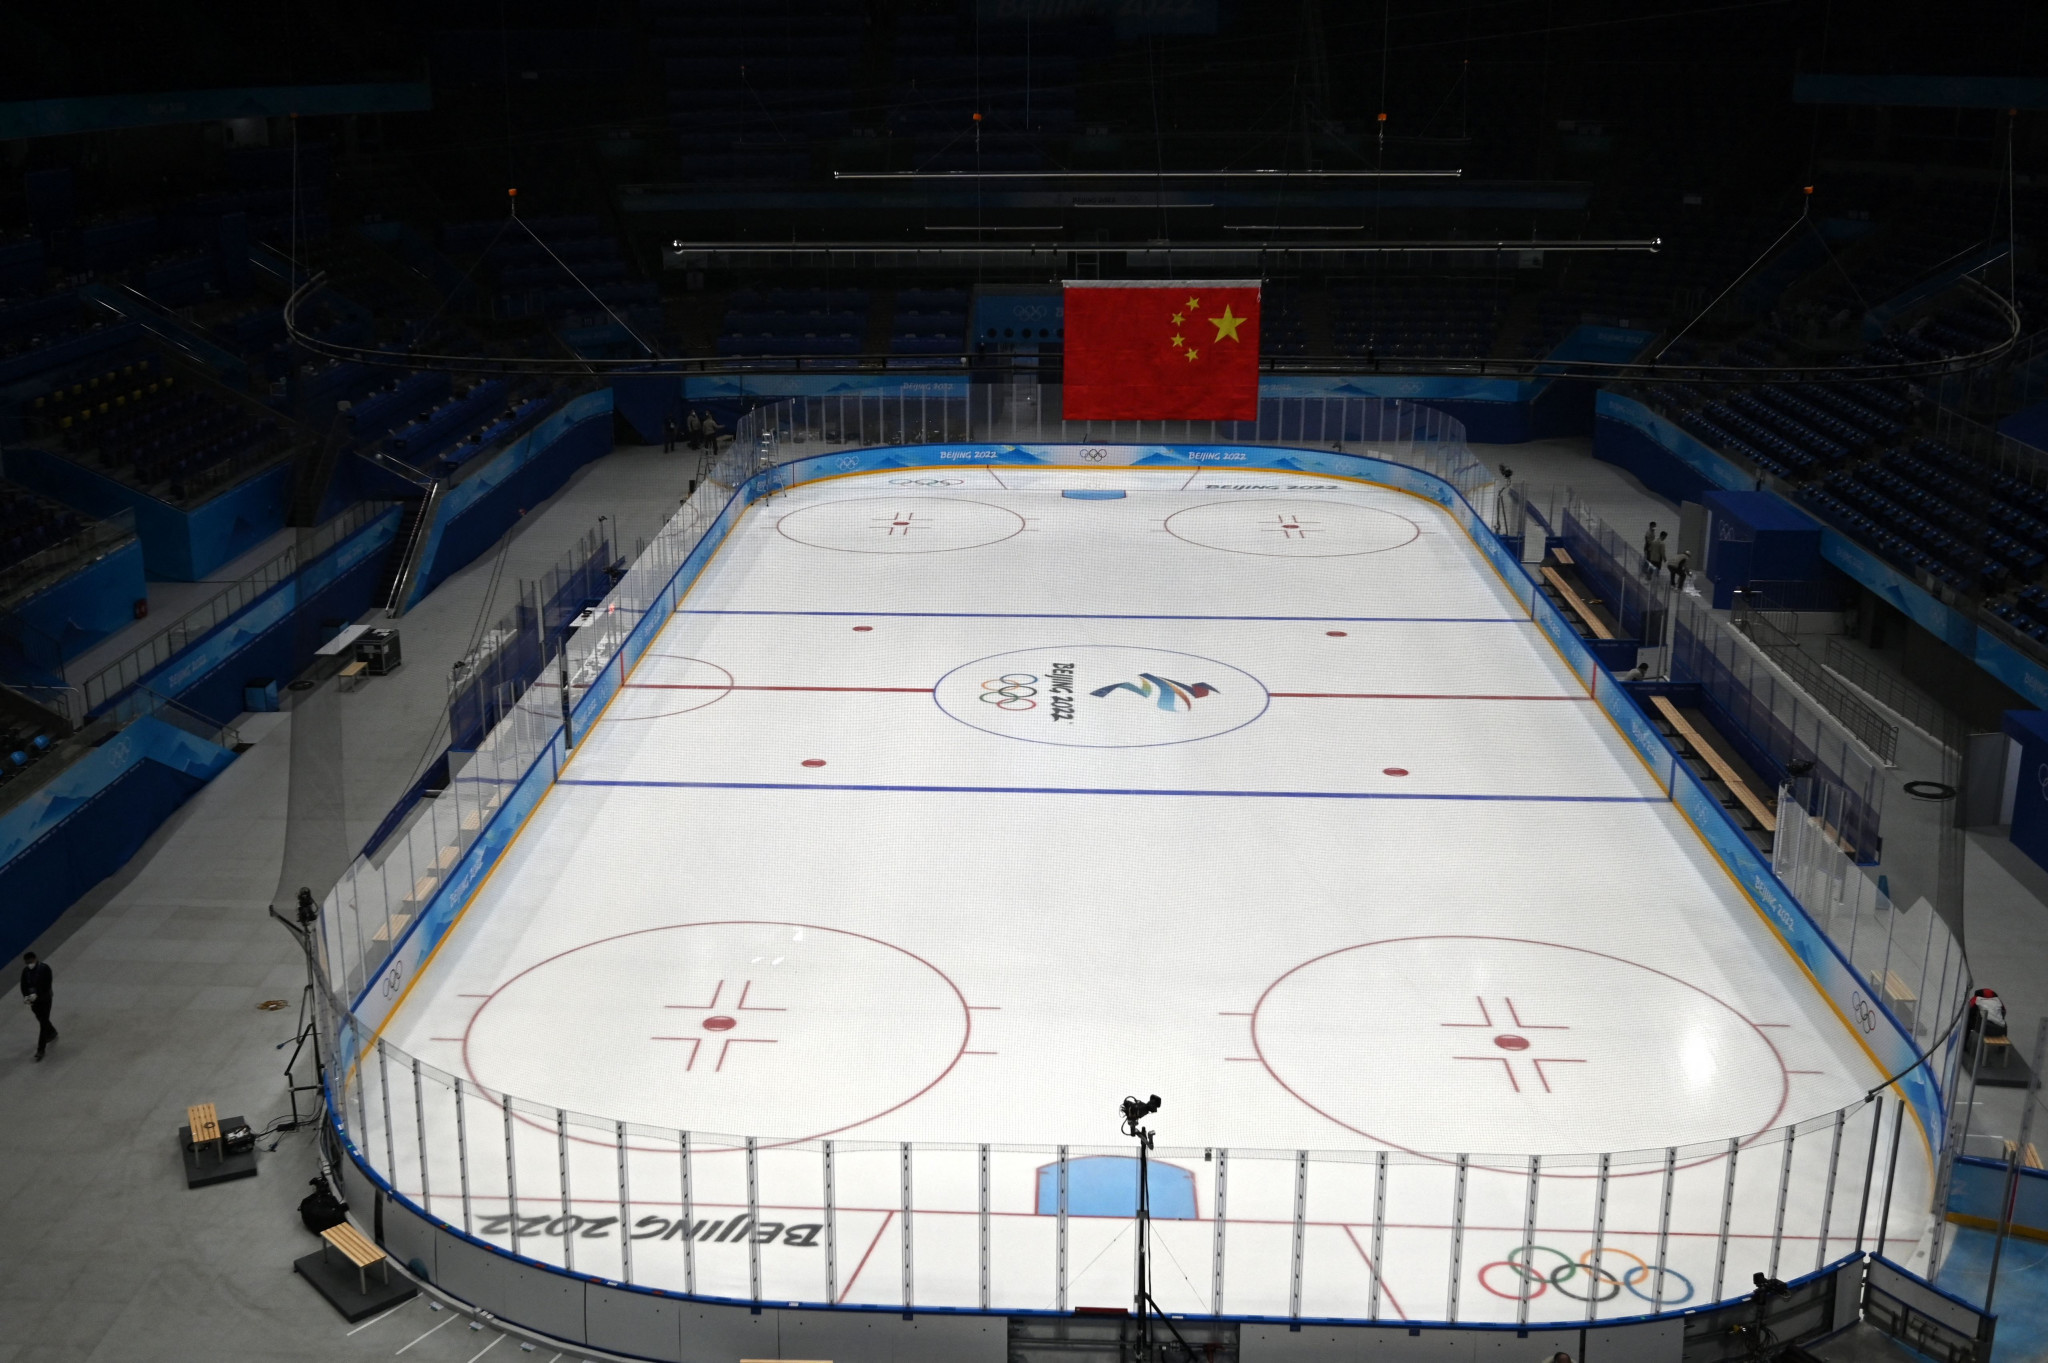 Teams have faced COVID-19 disruptions prior to the Beijing 2022 ice hockey tournament ©Getty Images